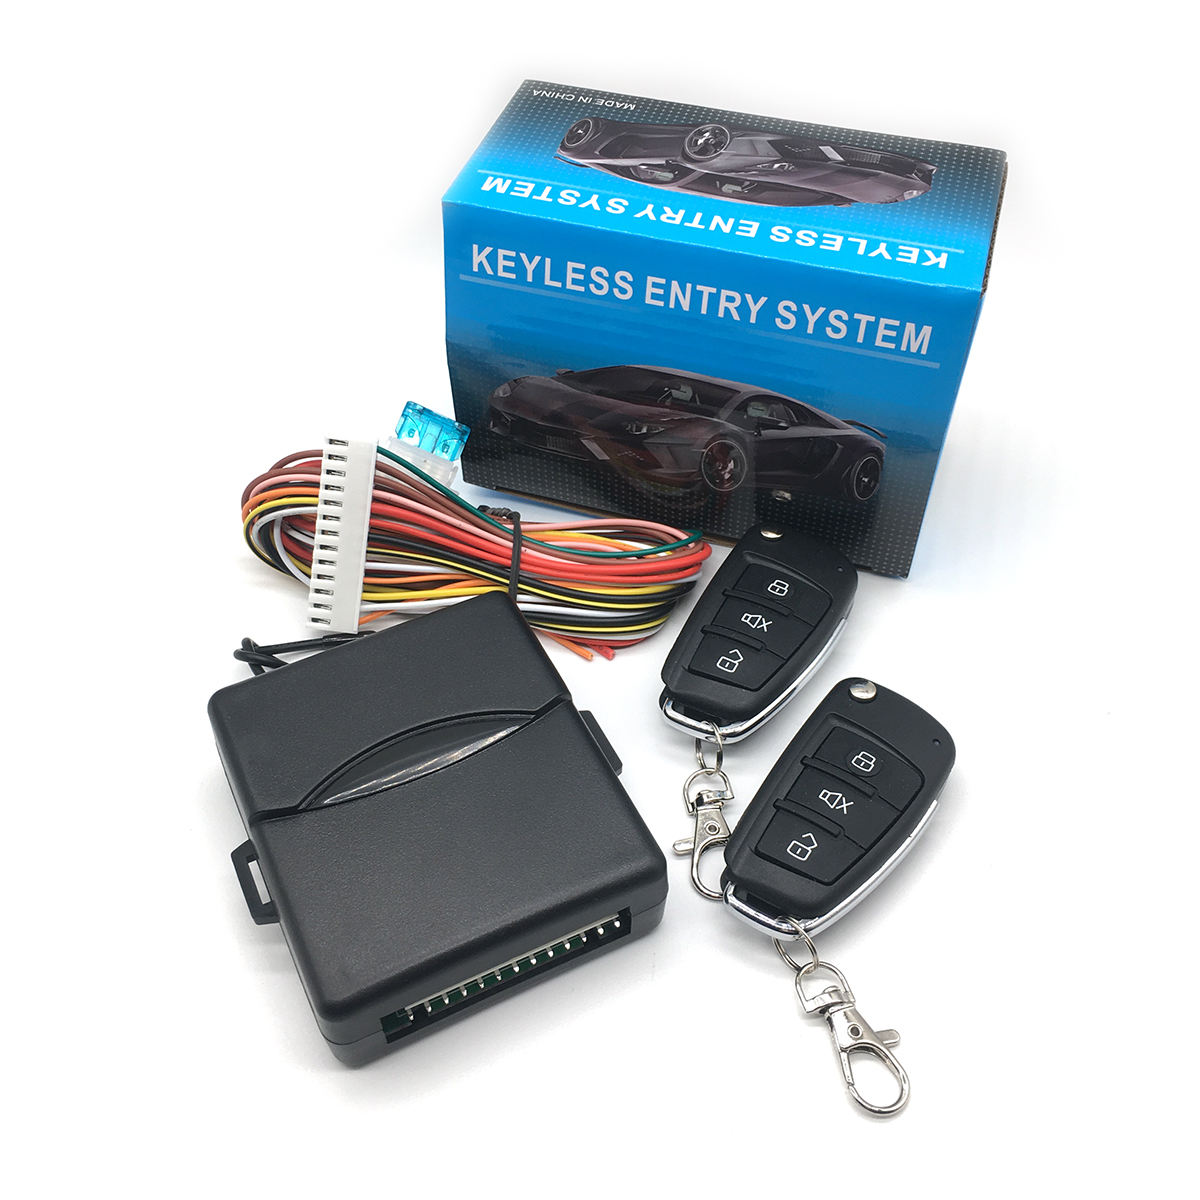 Remote Central Door Lock unlock with window trigger function keyless entry system car alarms